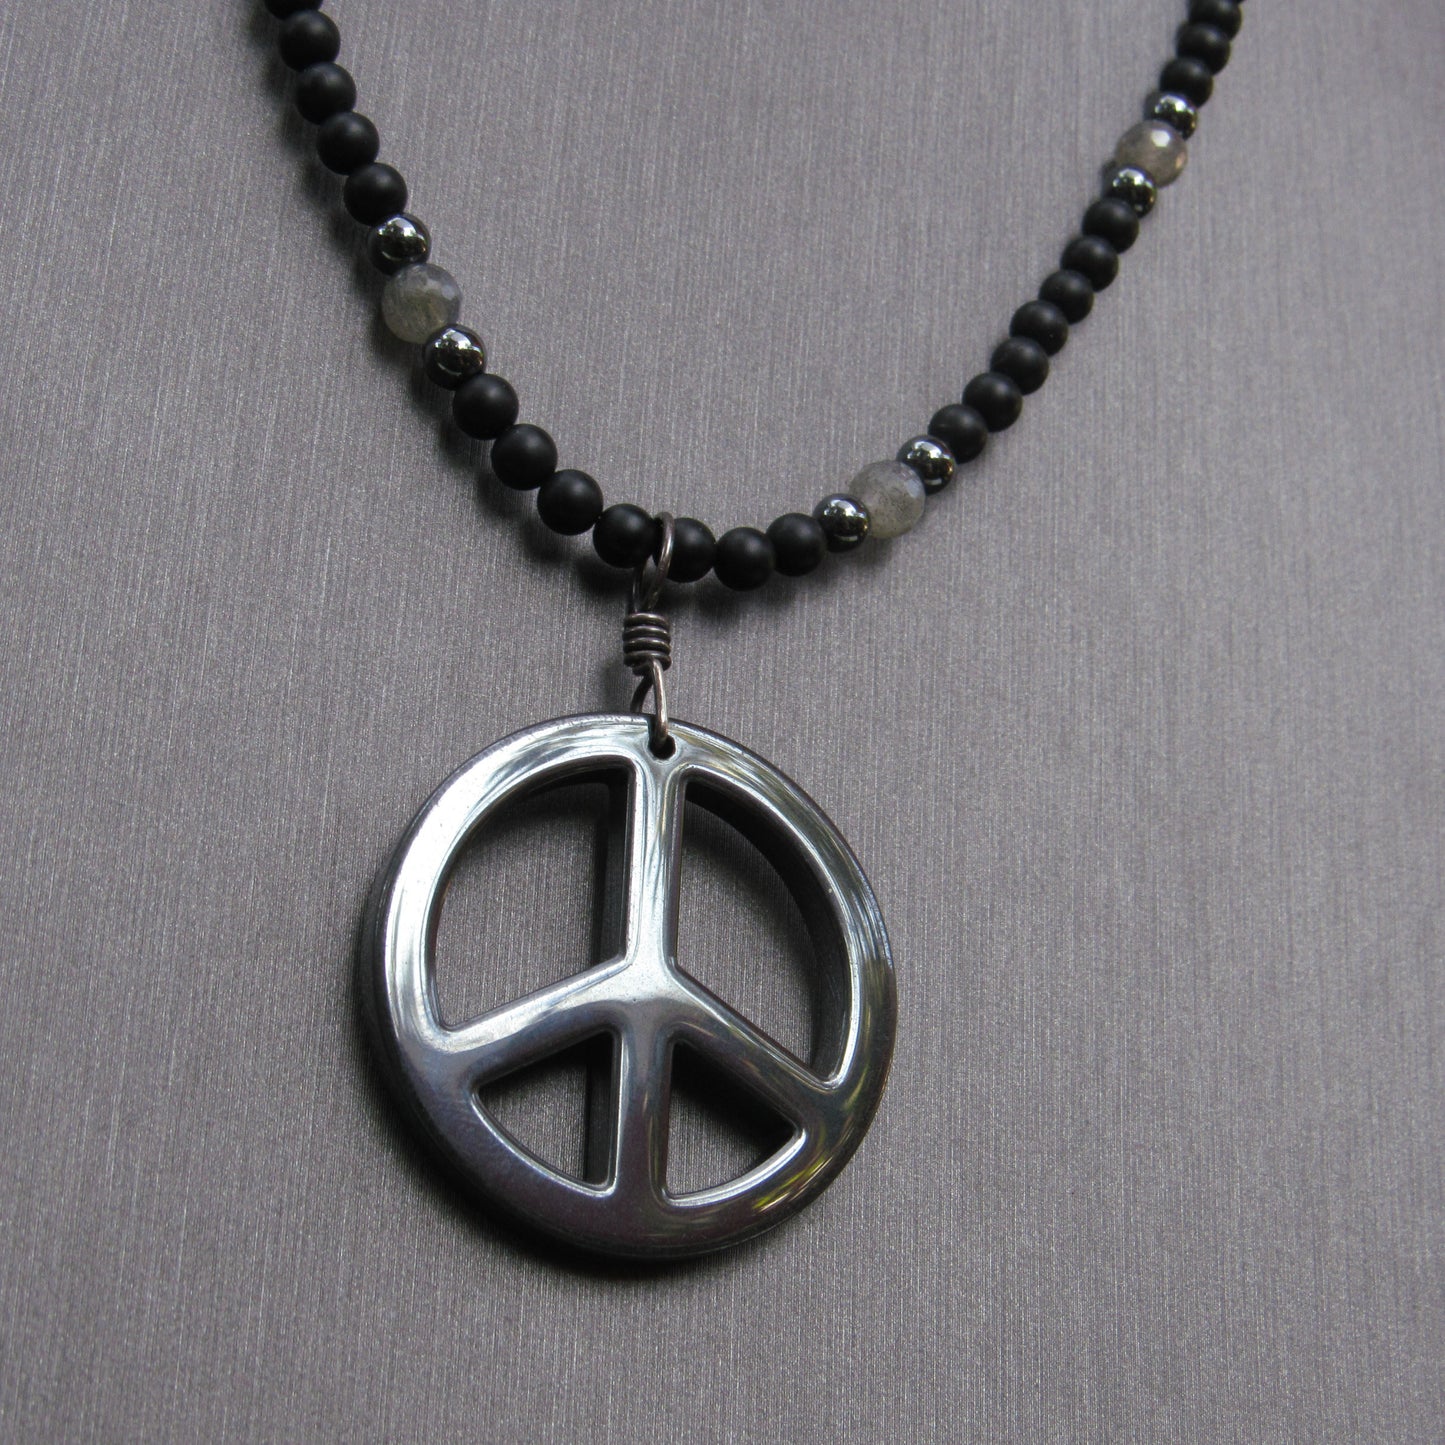 Hematite Peace Sign, Labradorite, Matte Onyx and Oxidized Sterling Silver Necklace